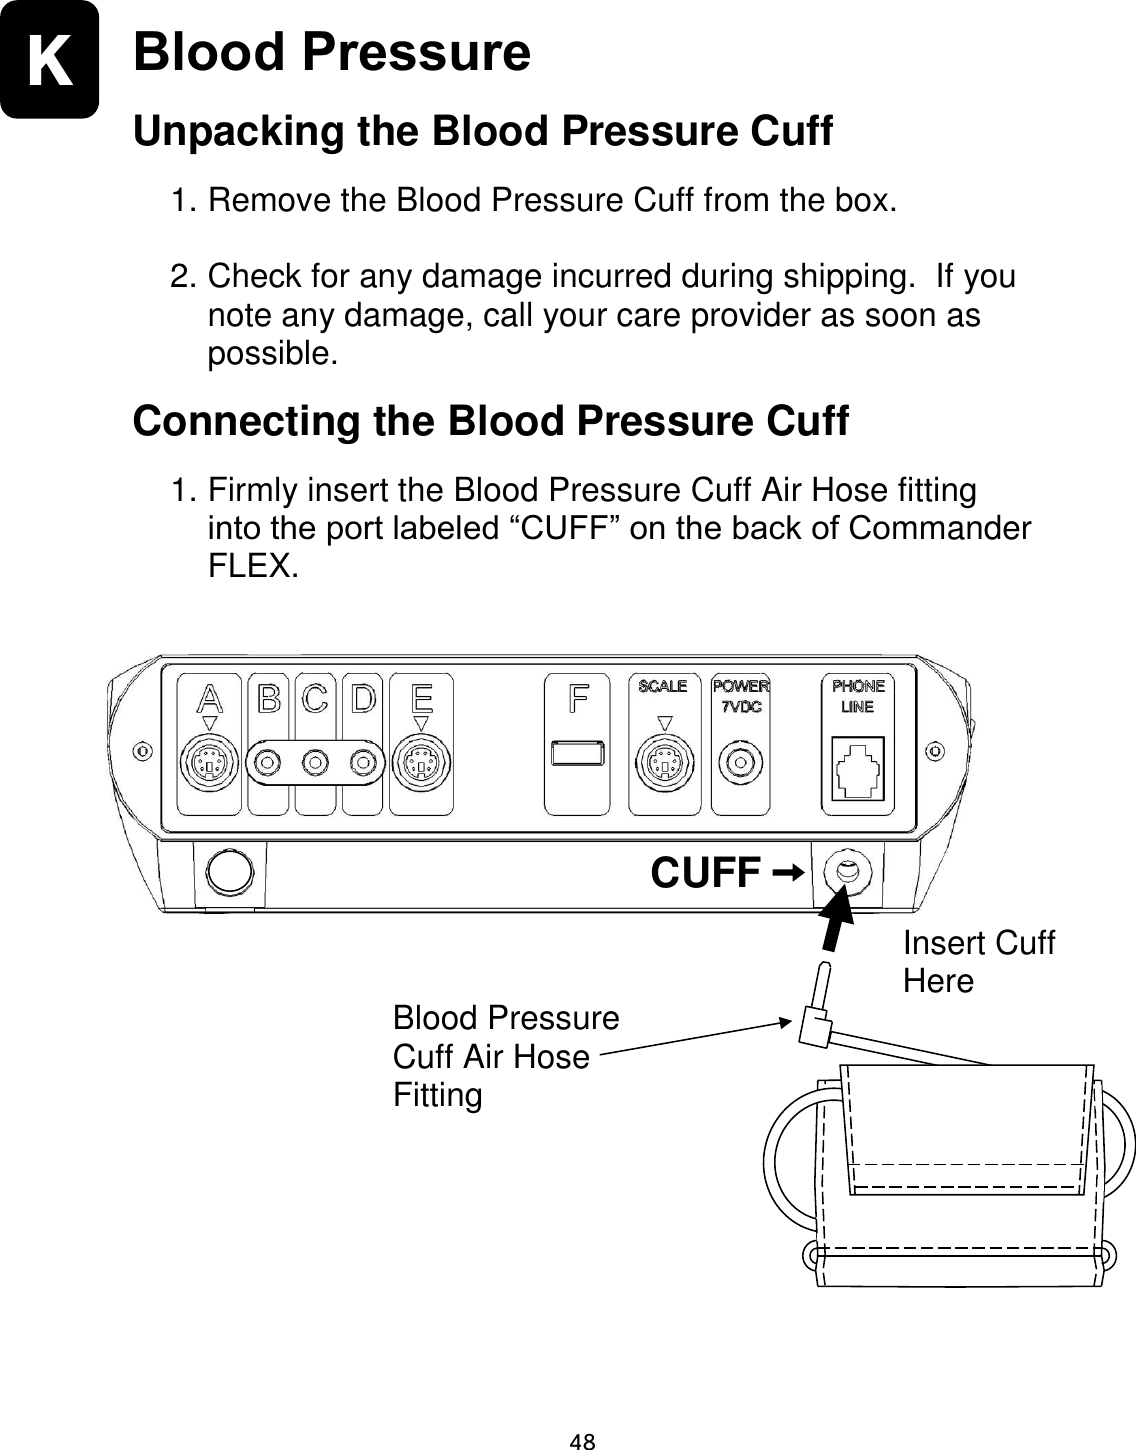                      48 K  Blood Pressure Unpacking the Blood Pressure Cuff  1. Remove the Blood Pressure Cuff from the box.    2. Check for any damage incurred during shipping.  If you note any damage, call your care provider as soon as possible.   Connecting the Blood Pressure Cuff  1. Firmly insert the Blood Pressure Cuff Air Hose fitting into the port labeled “CUFF” on the back of Commander FLEX.                            CUFF Blood Pressure Cuff Air Hose Fitting Insert Cuff  Here 